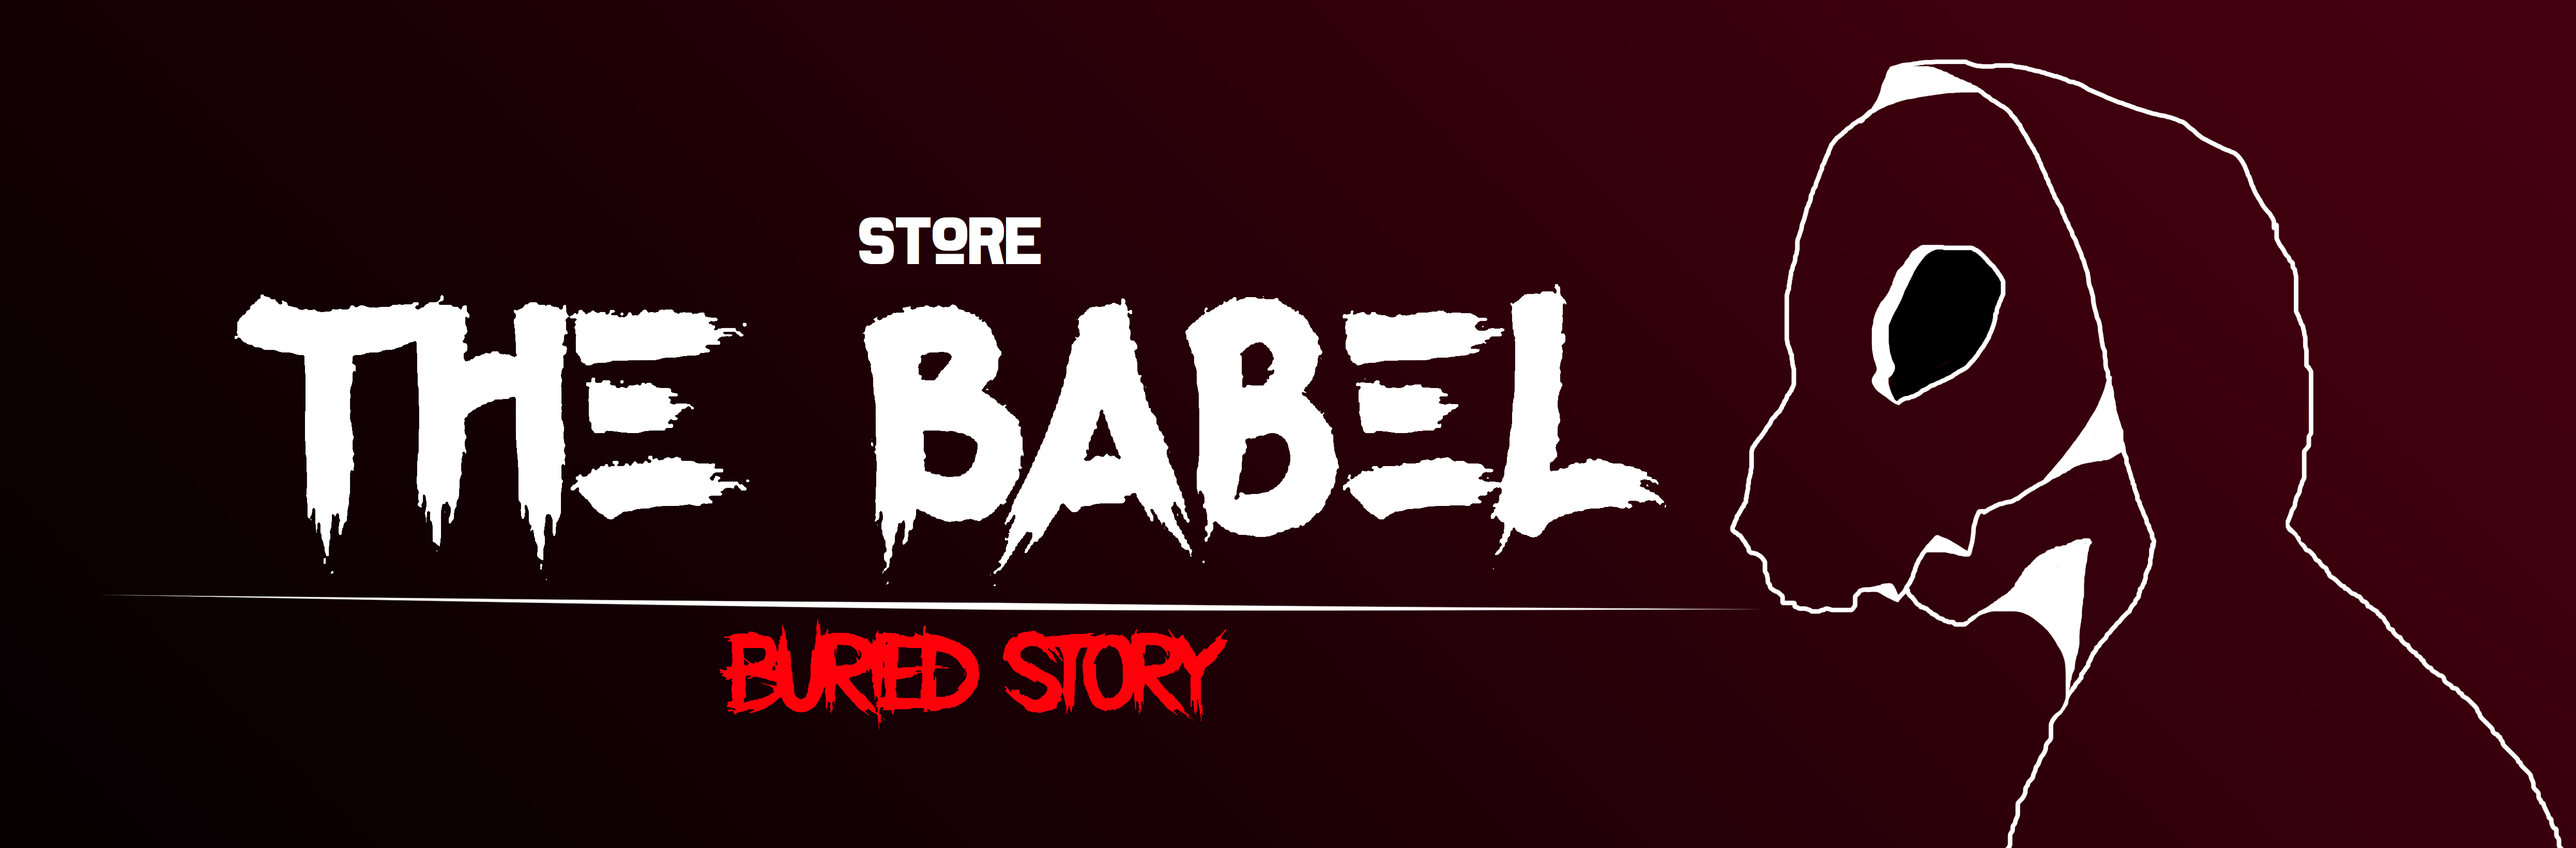 The Babel: Buried Story